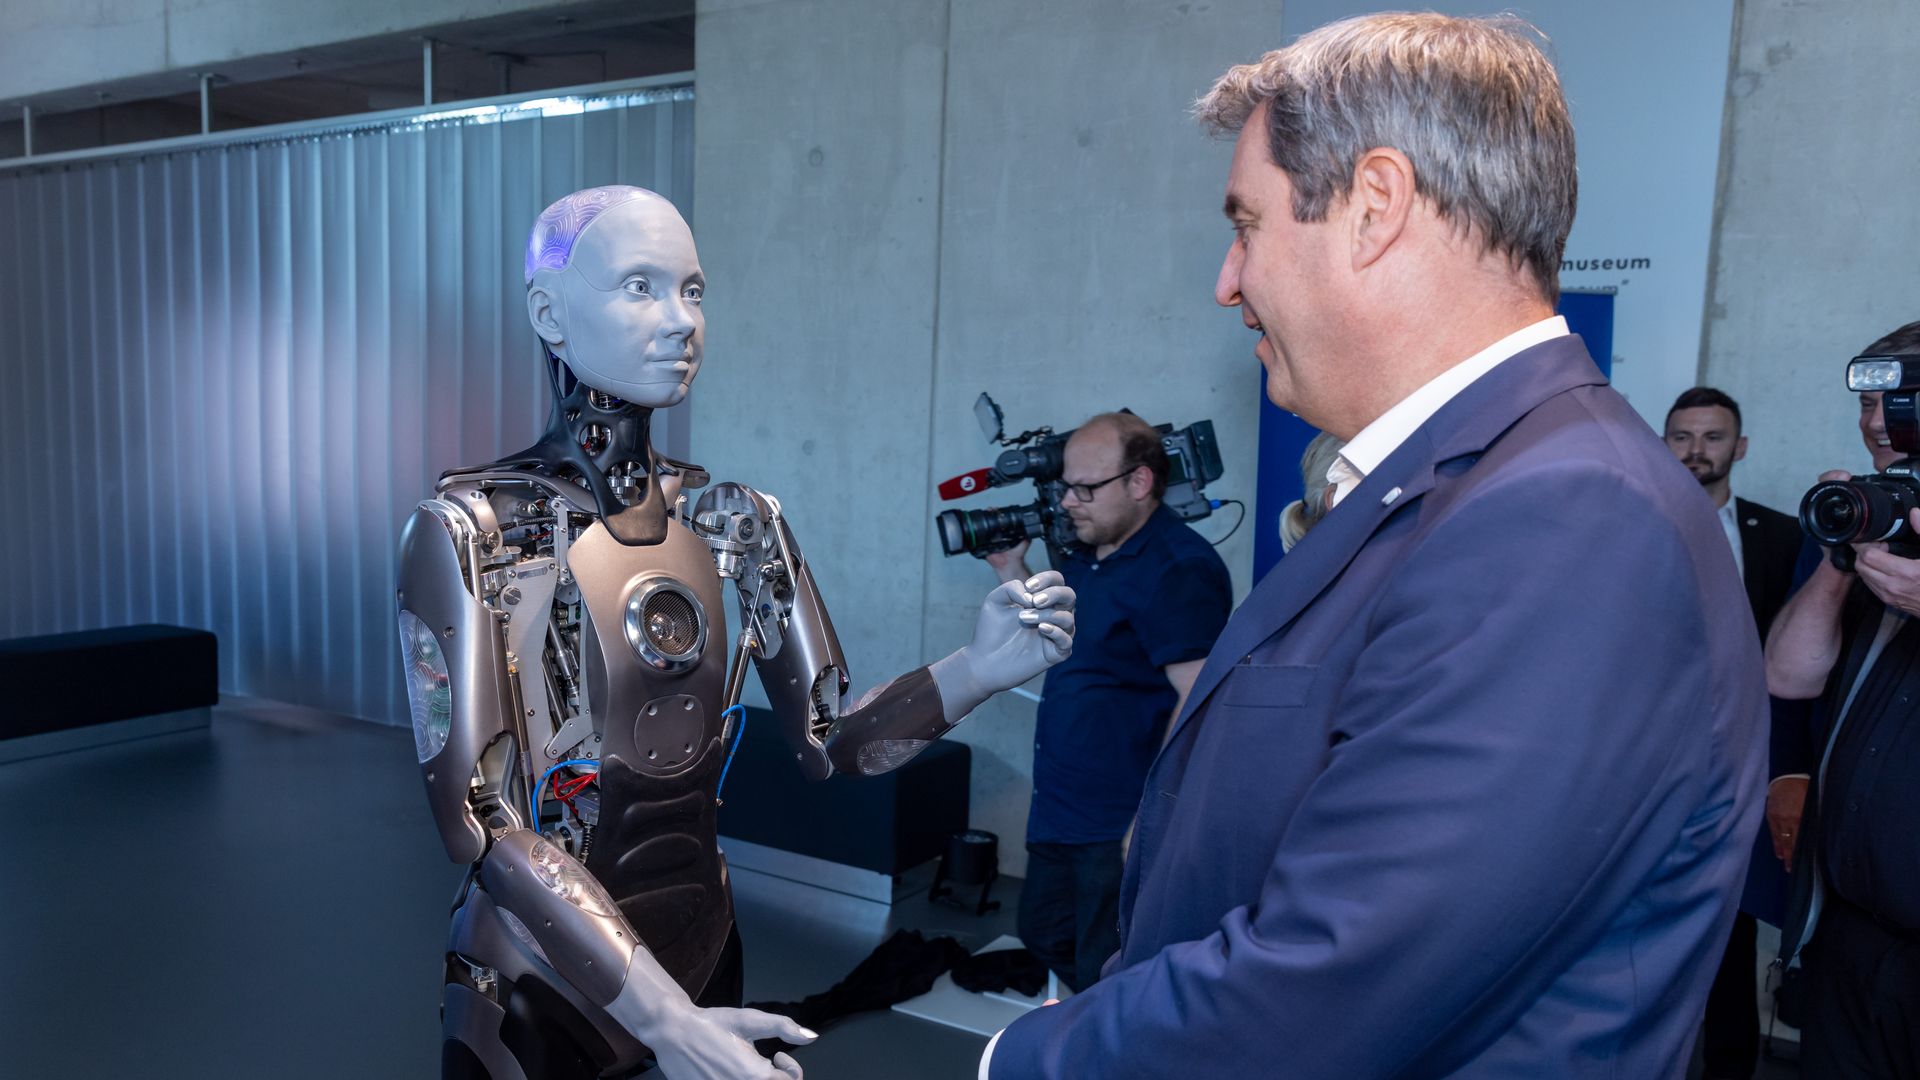 A humanoid robot greets a Bavarian official.